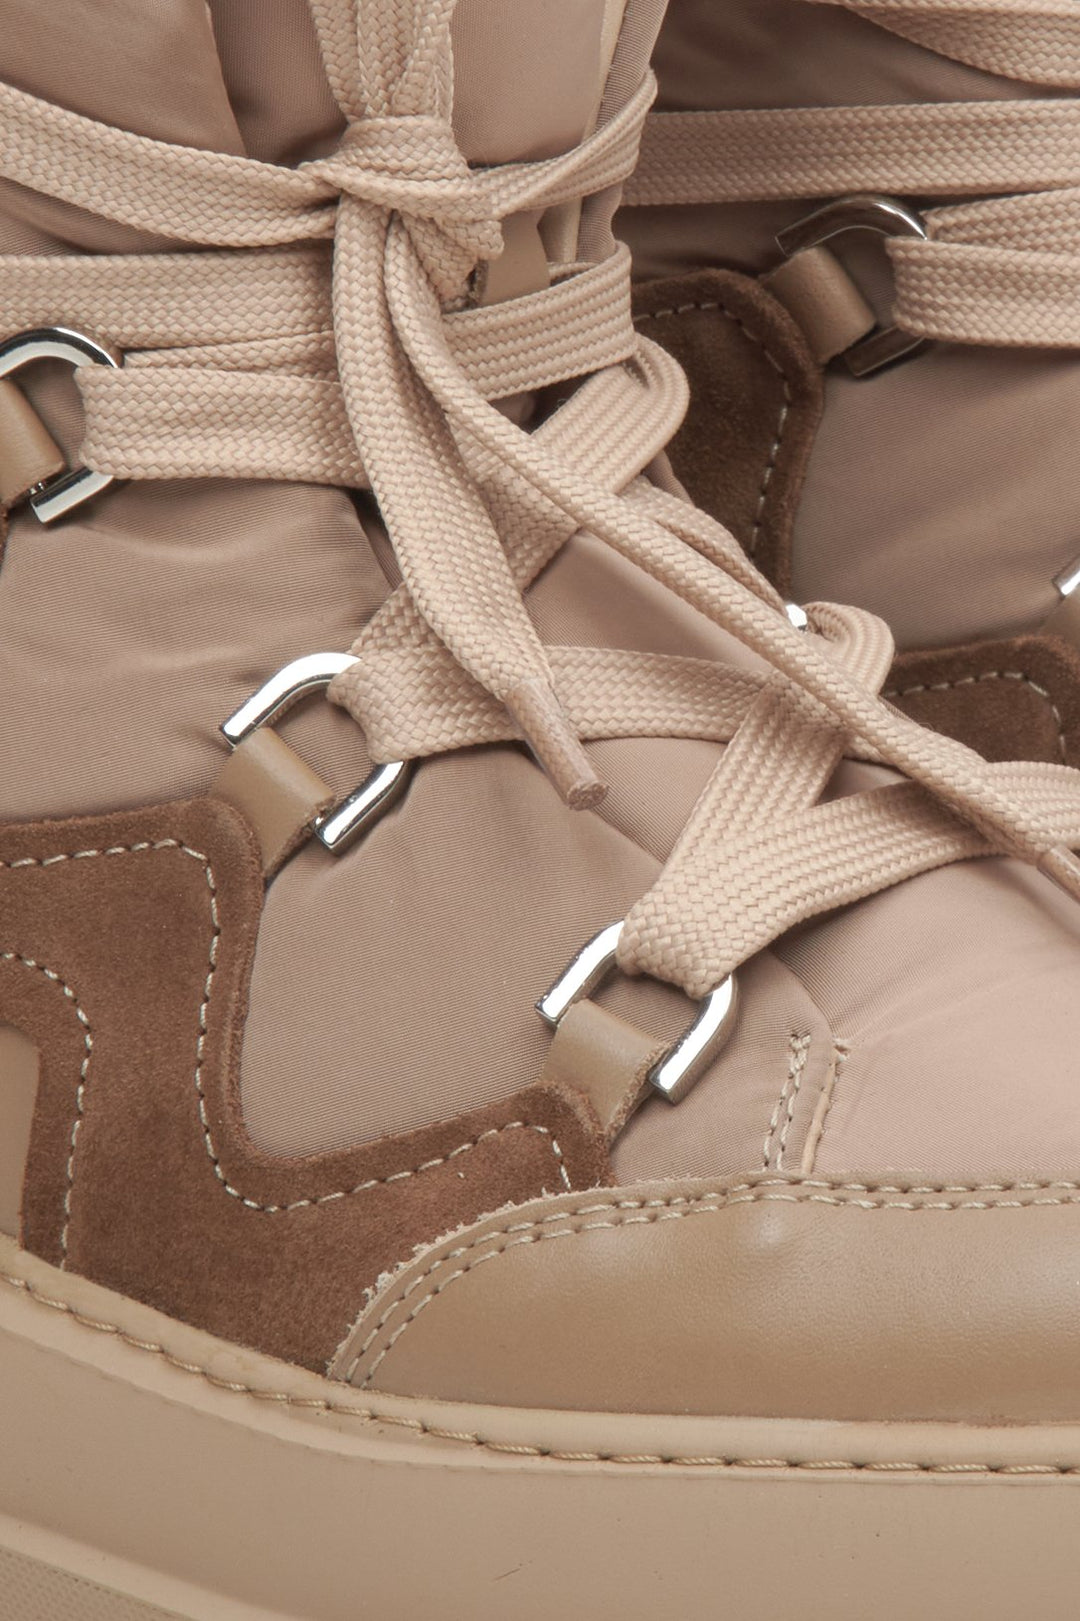 Brown Estro women's snow boots with laces - close-up.